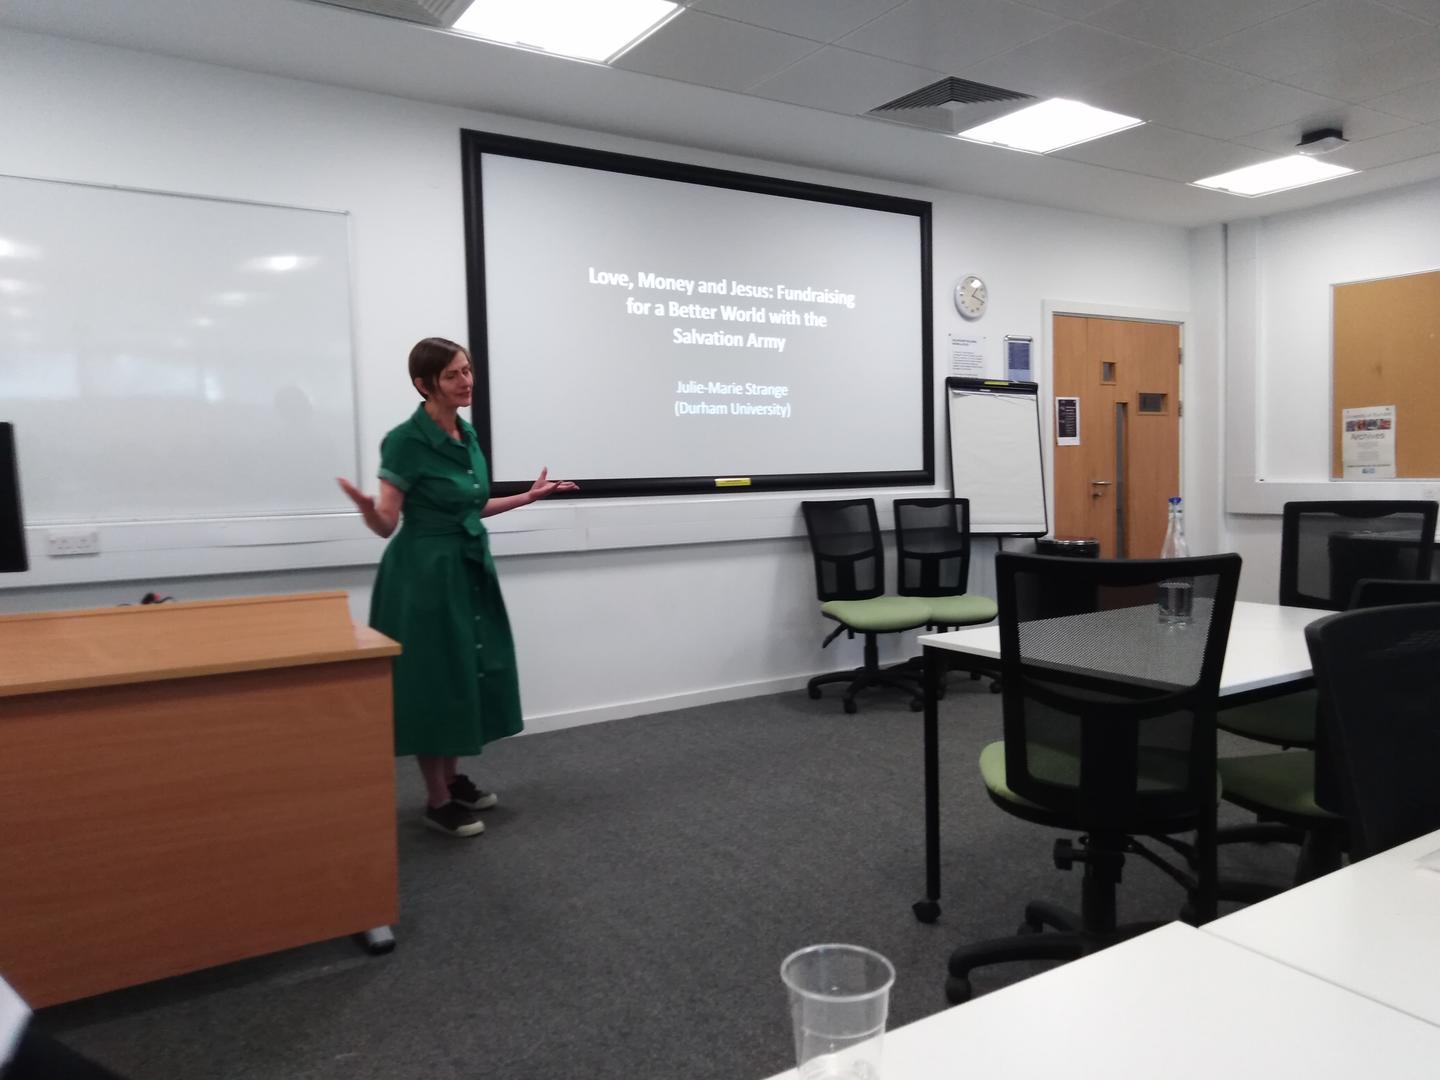 Julie-Marie Strange presenting her paper  ‘Love, Money and Jesus: Fundraising for a Better World with the Salvation Army’, BAVS Conference, 2019